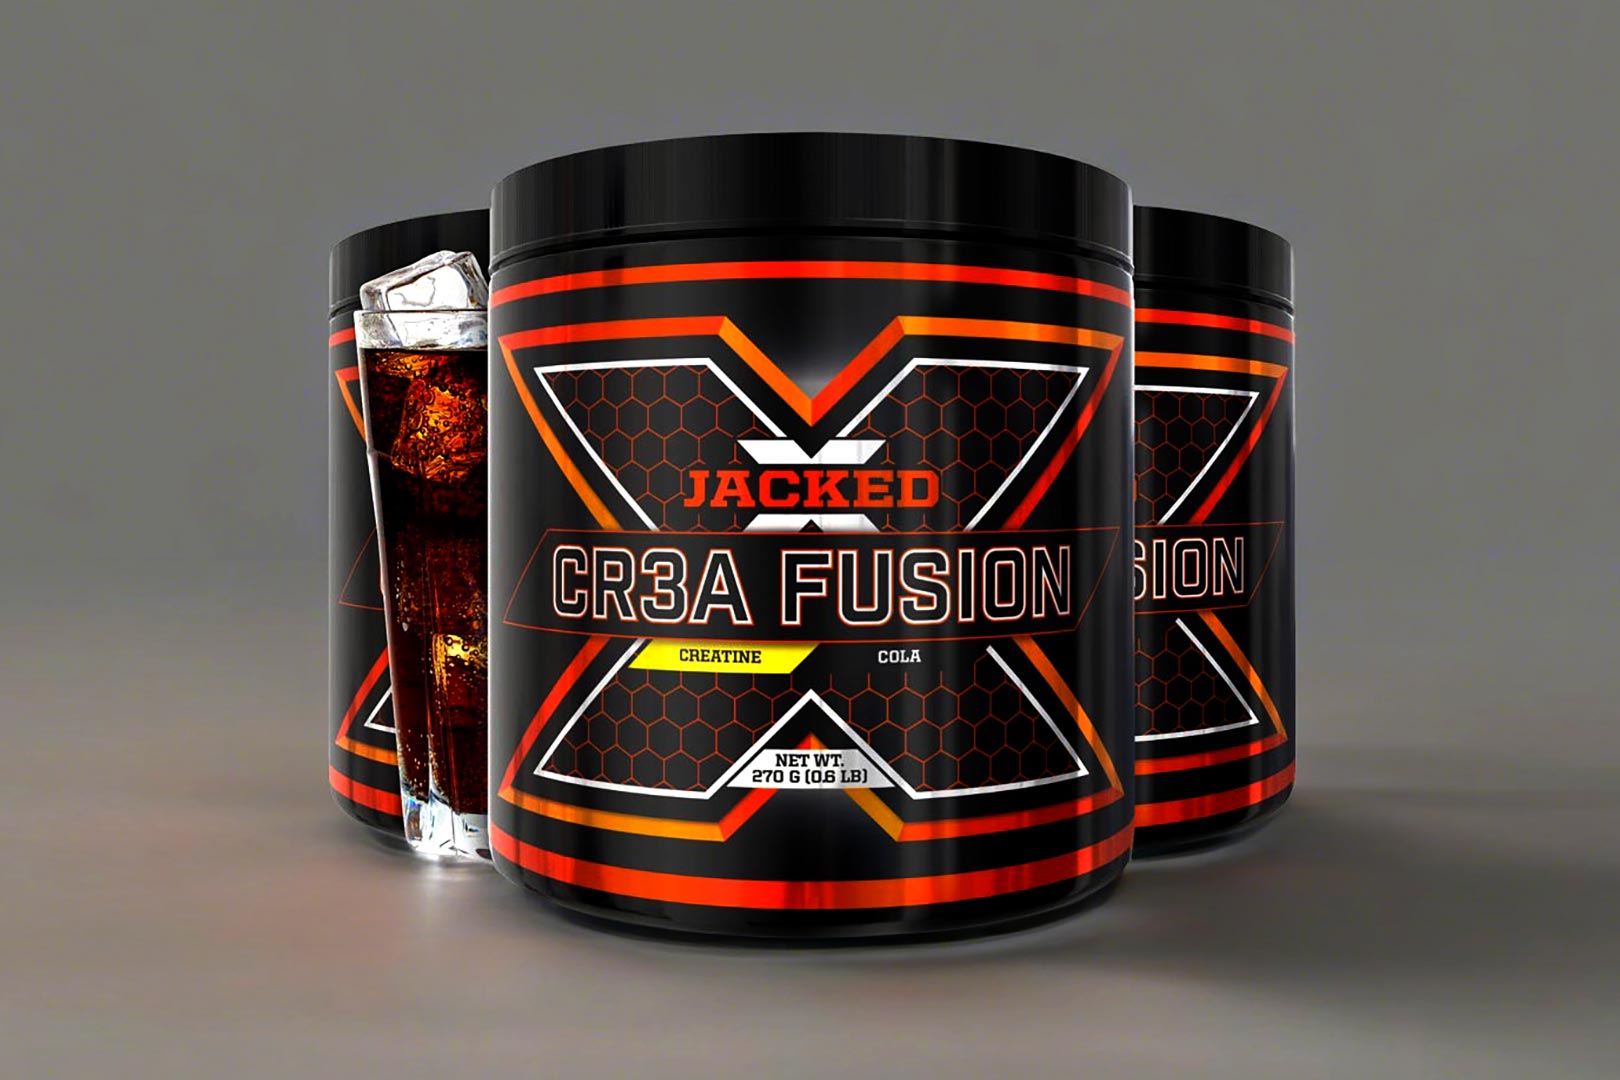 Jacked Cola Cr3a Fusion